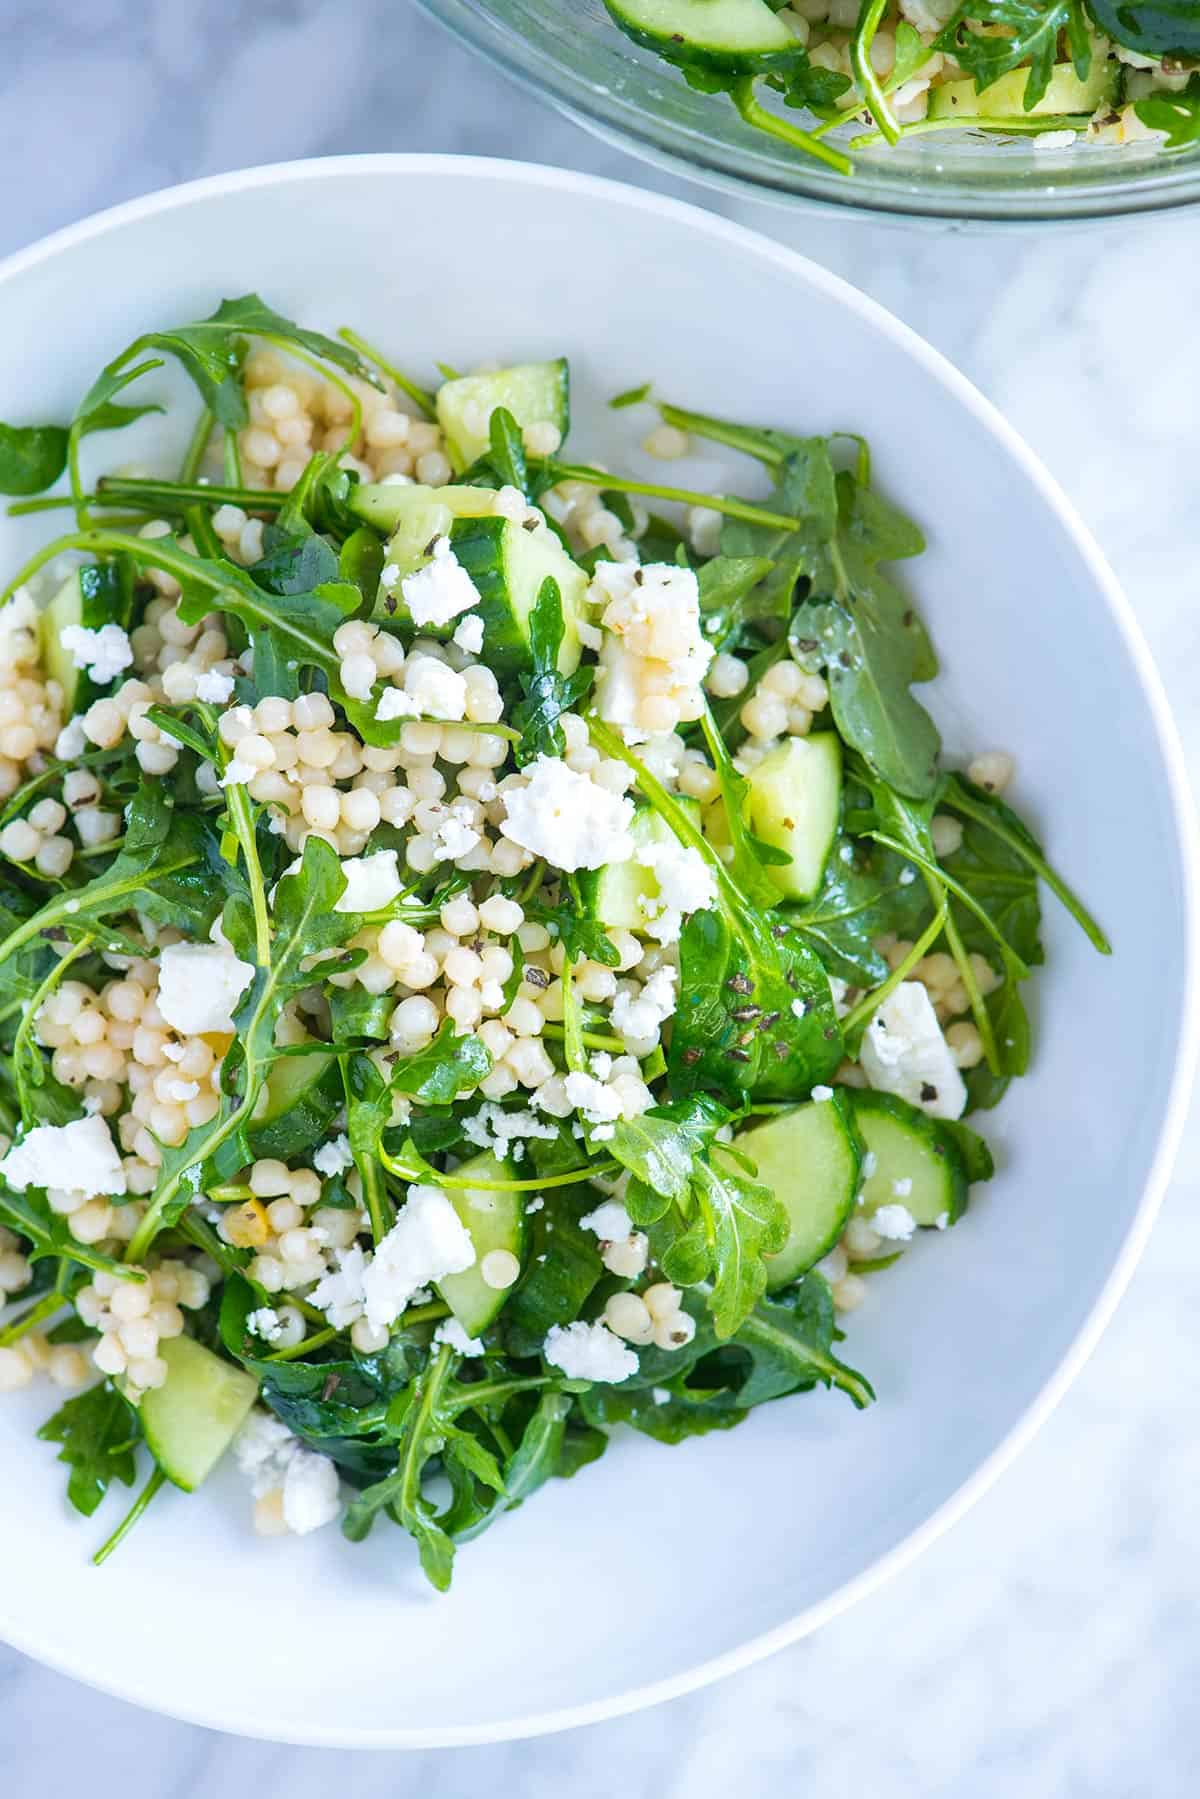 The moment you make this salad, you'll be itching to make it again. This arugula and couscous salad is simple, fast and tastes like it came from a fancy restaurant. 